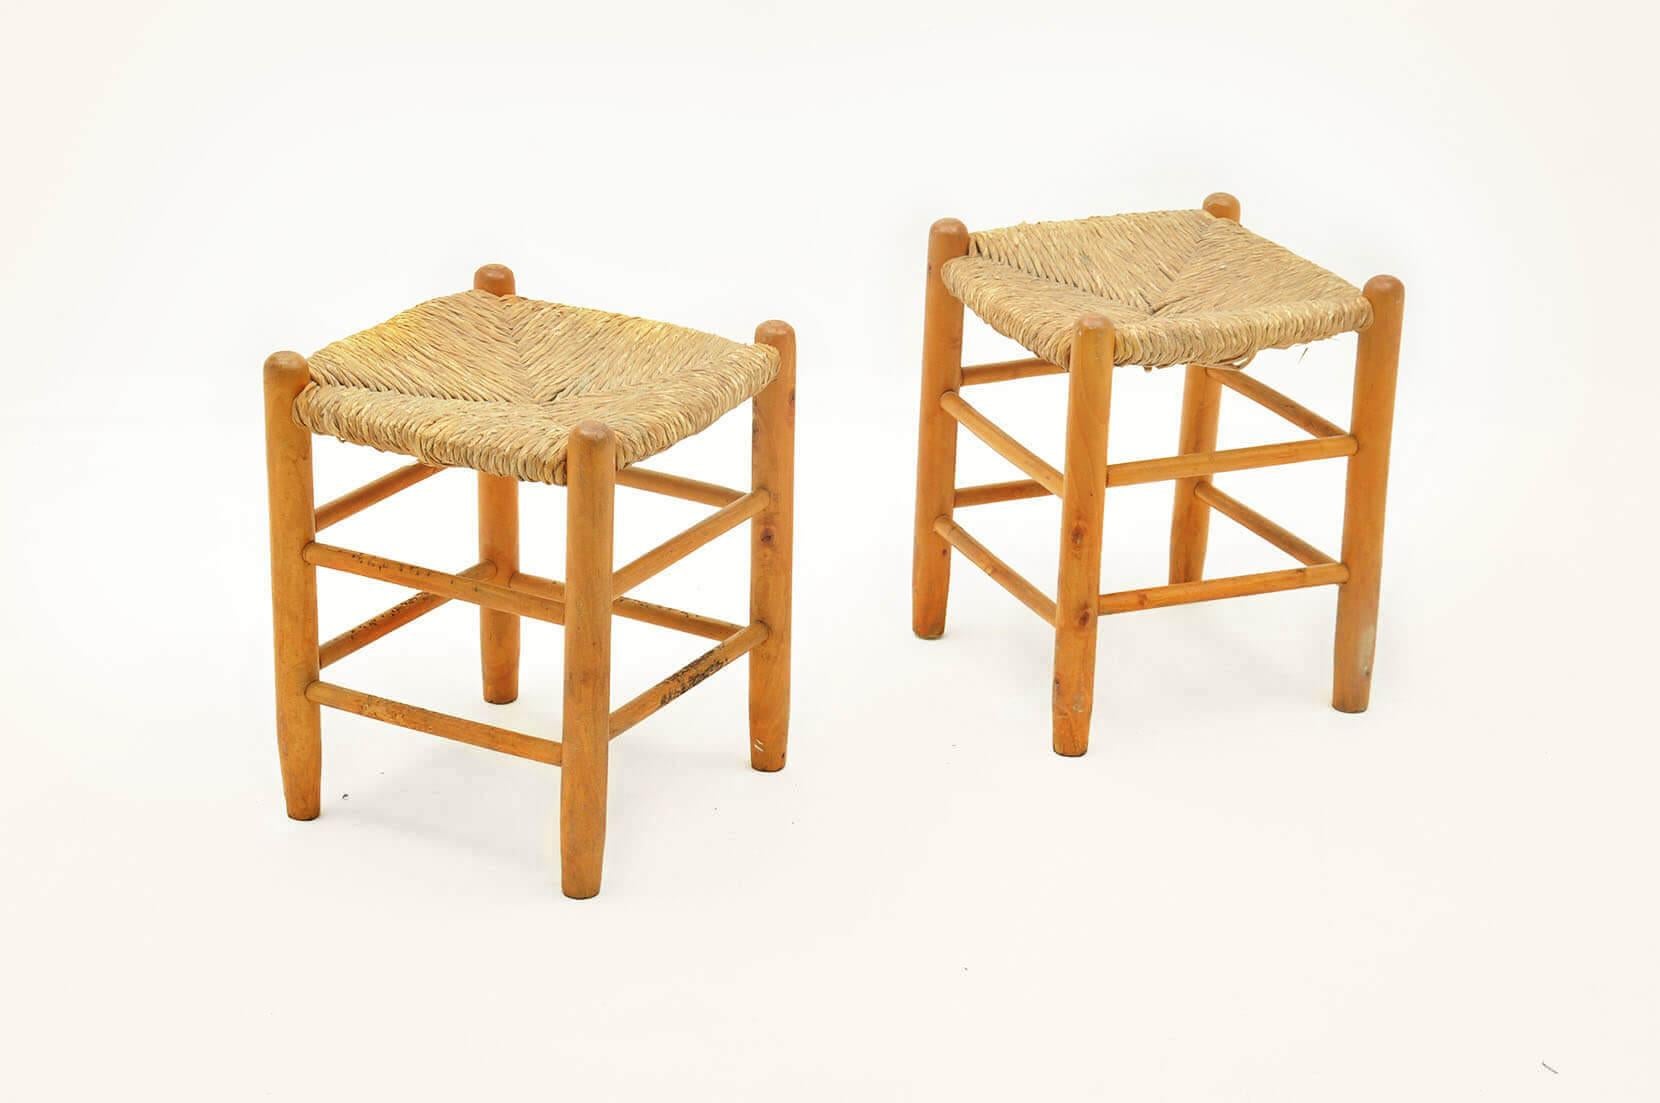 Pair of Wood and Staw Stools by Charlotte Perriand for L'équipement de la Maison 6